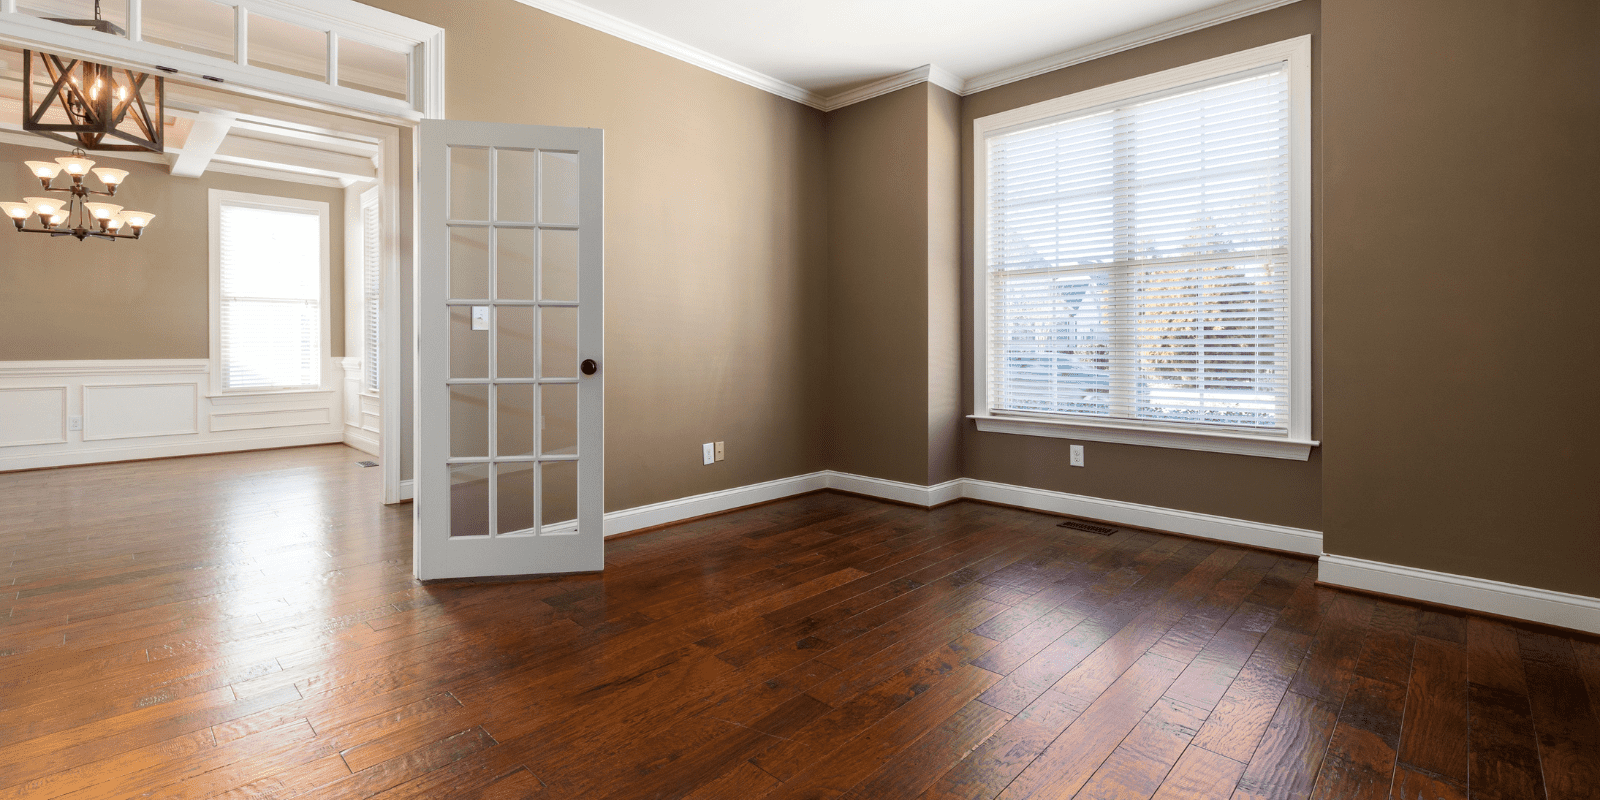 How to Sell Your Empty Property in Ocala, FL